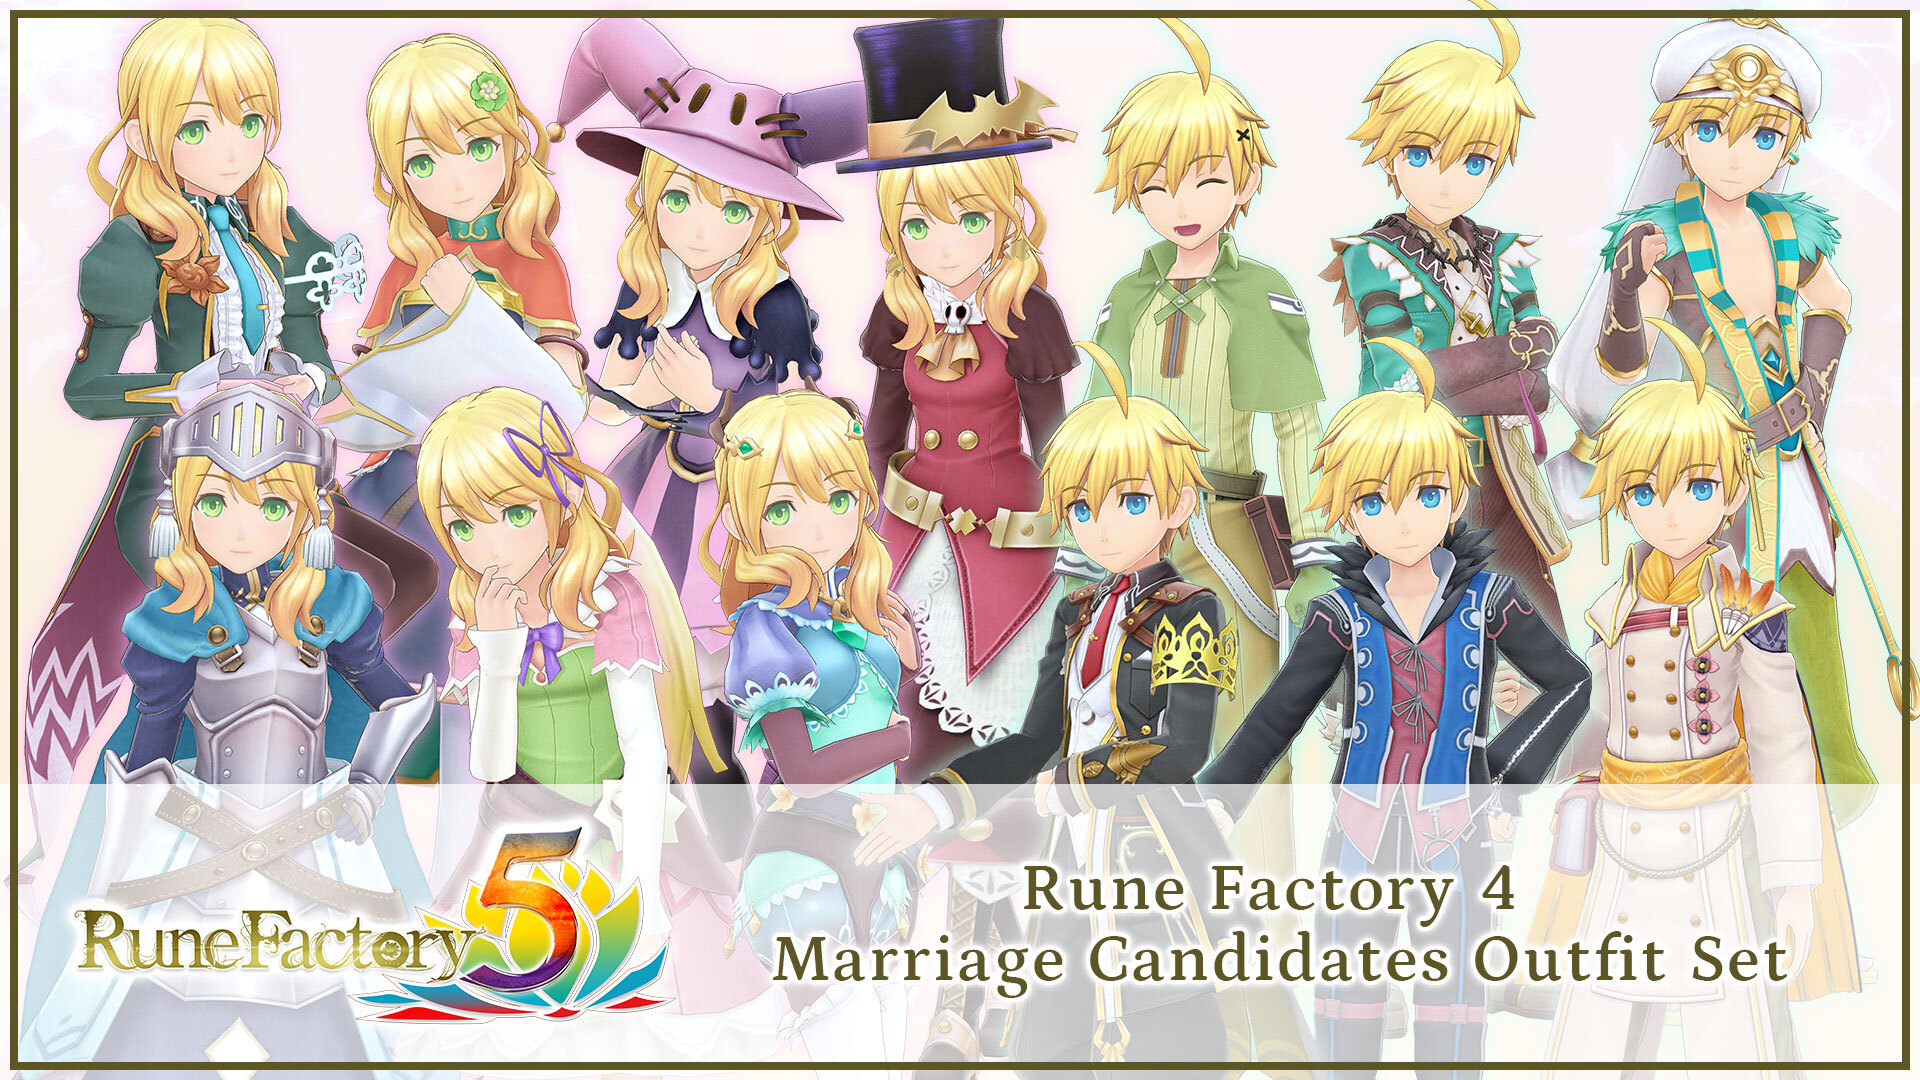 Rune Factory 4 Marriage Candidates Outfit Set